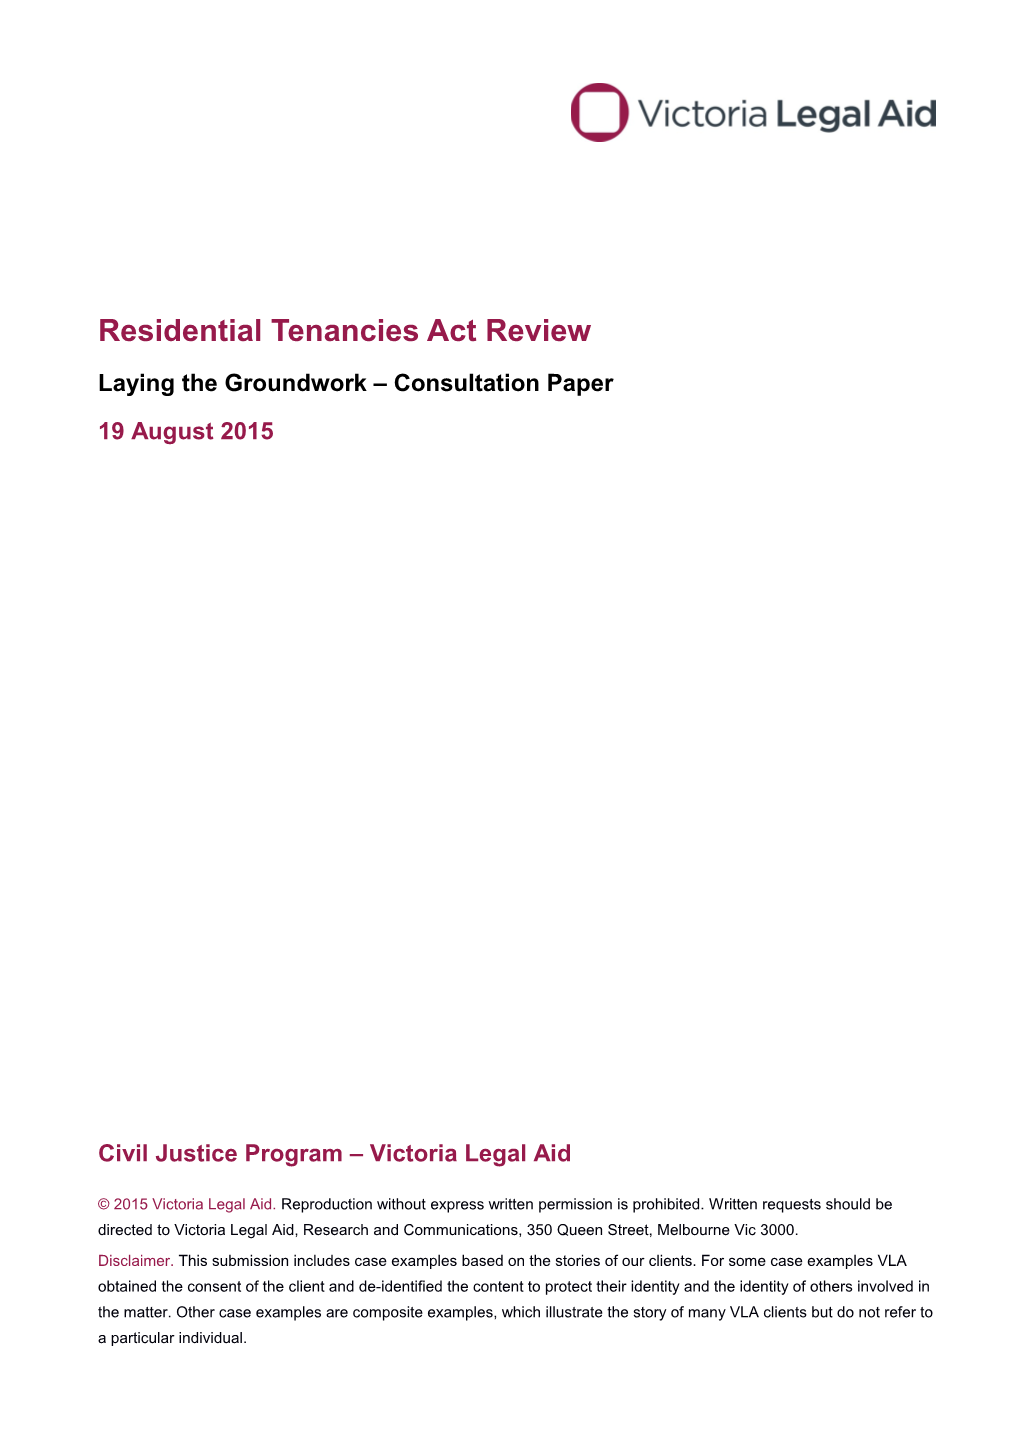 Residential Tenancies Act Review Laying the Groundwork Submission